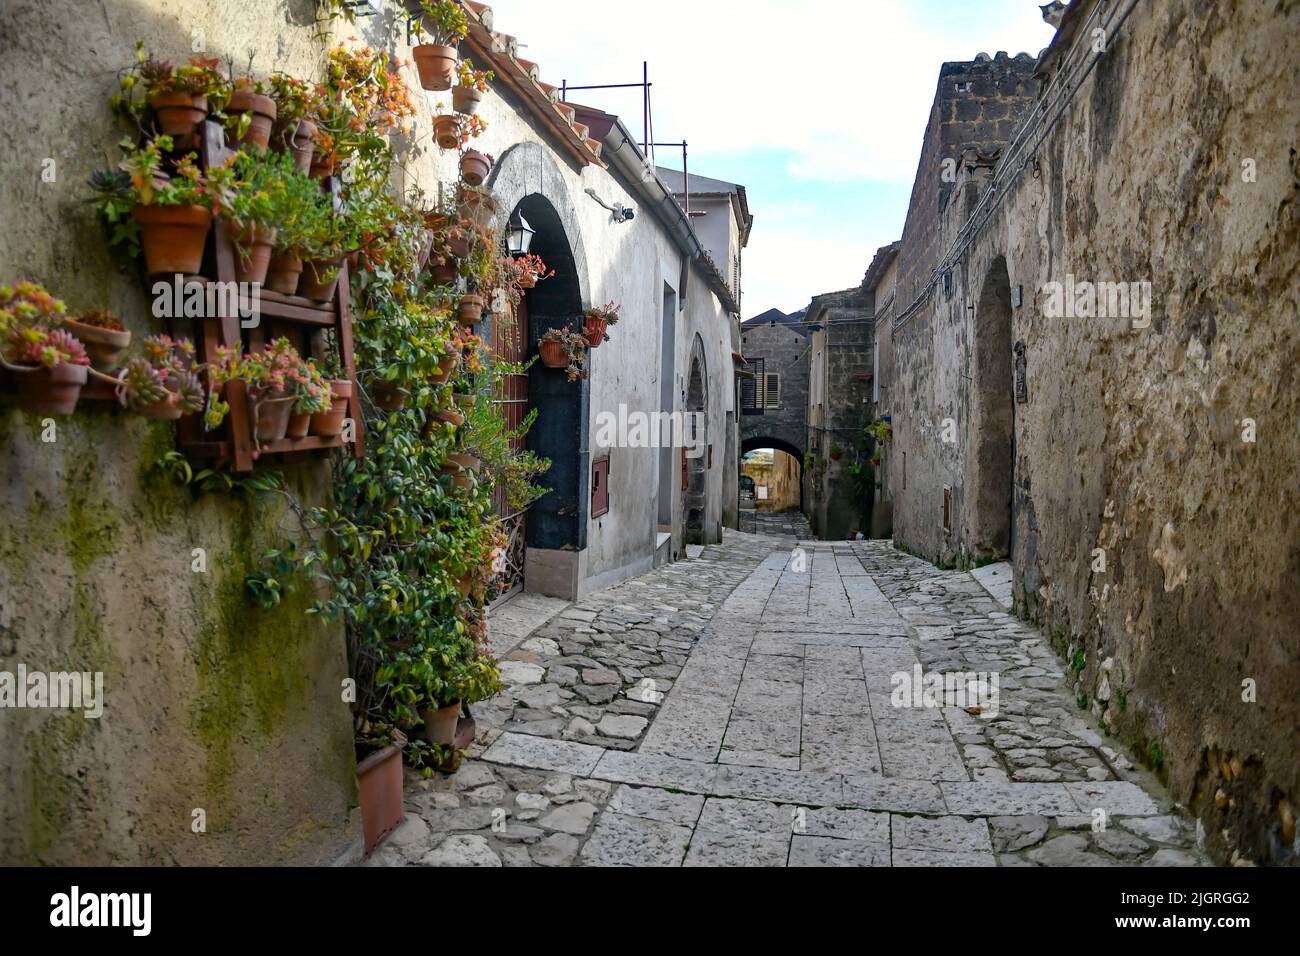 A narrow street among the old stone houses and fences of the oldest district of the city of Caserta Stock Photo